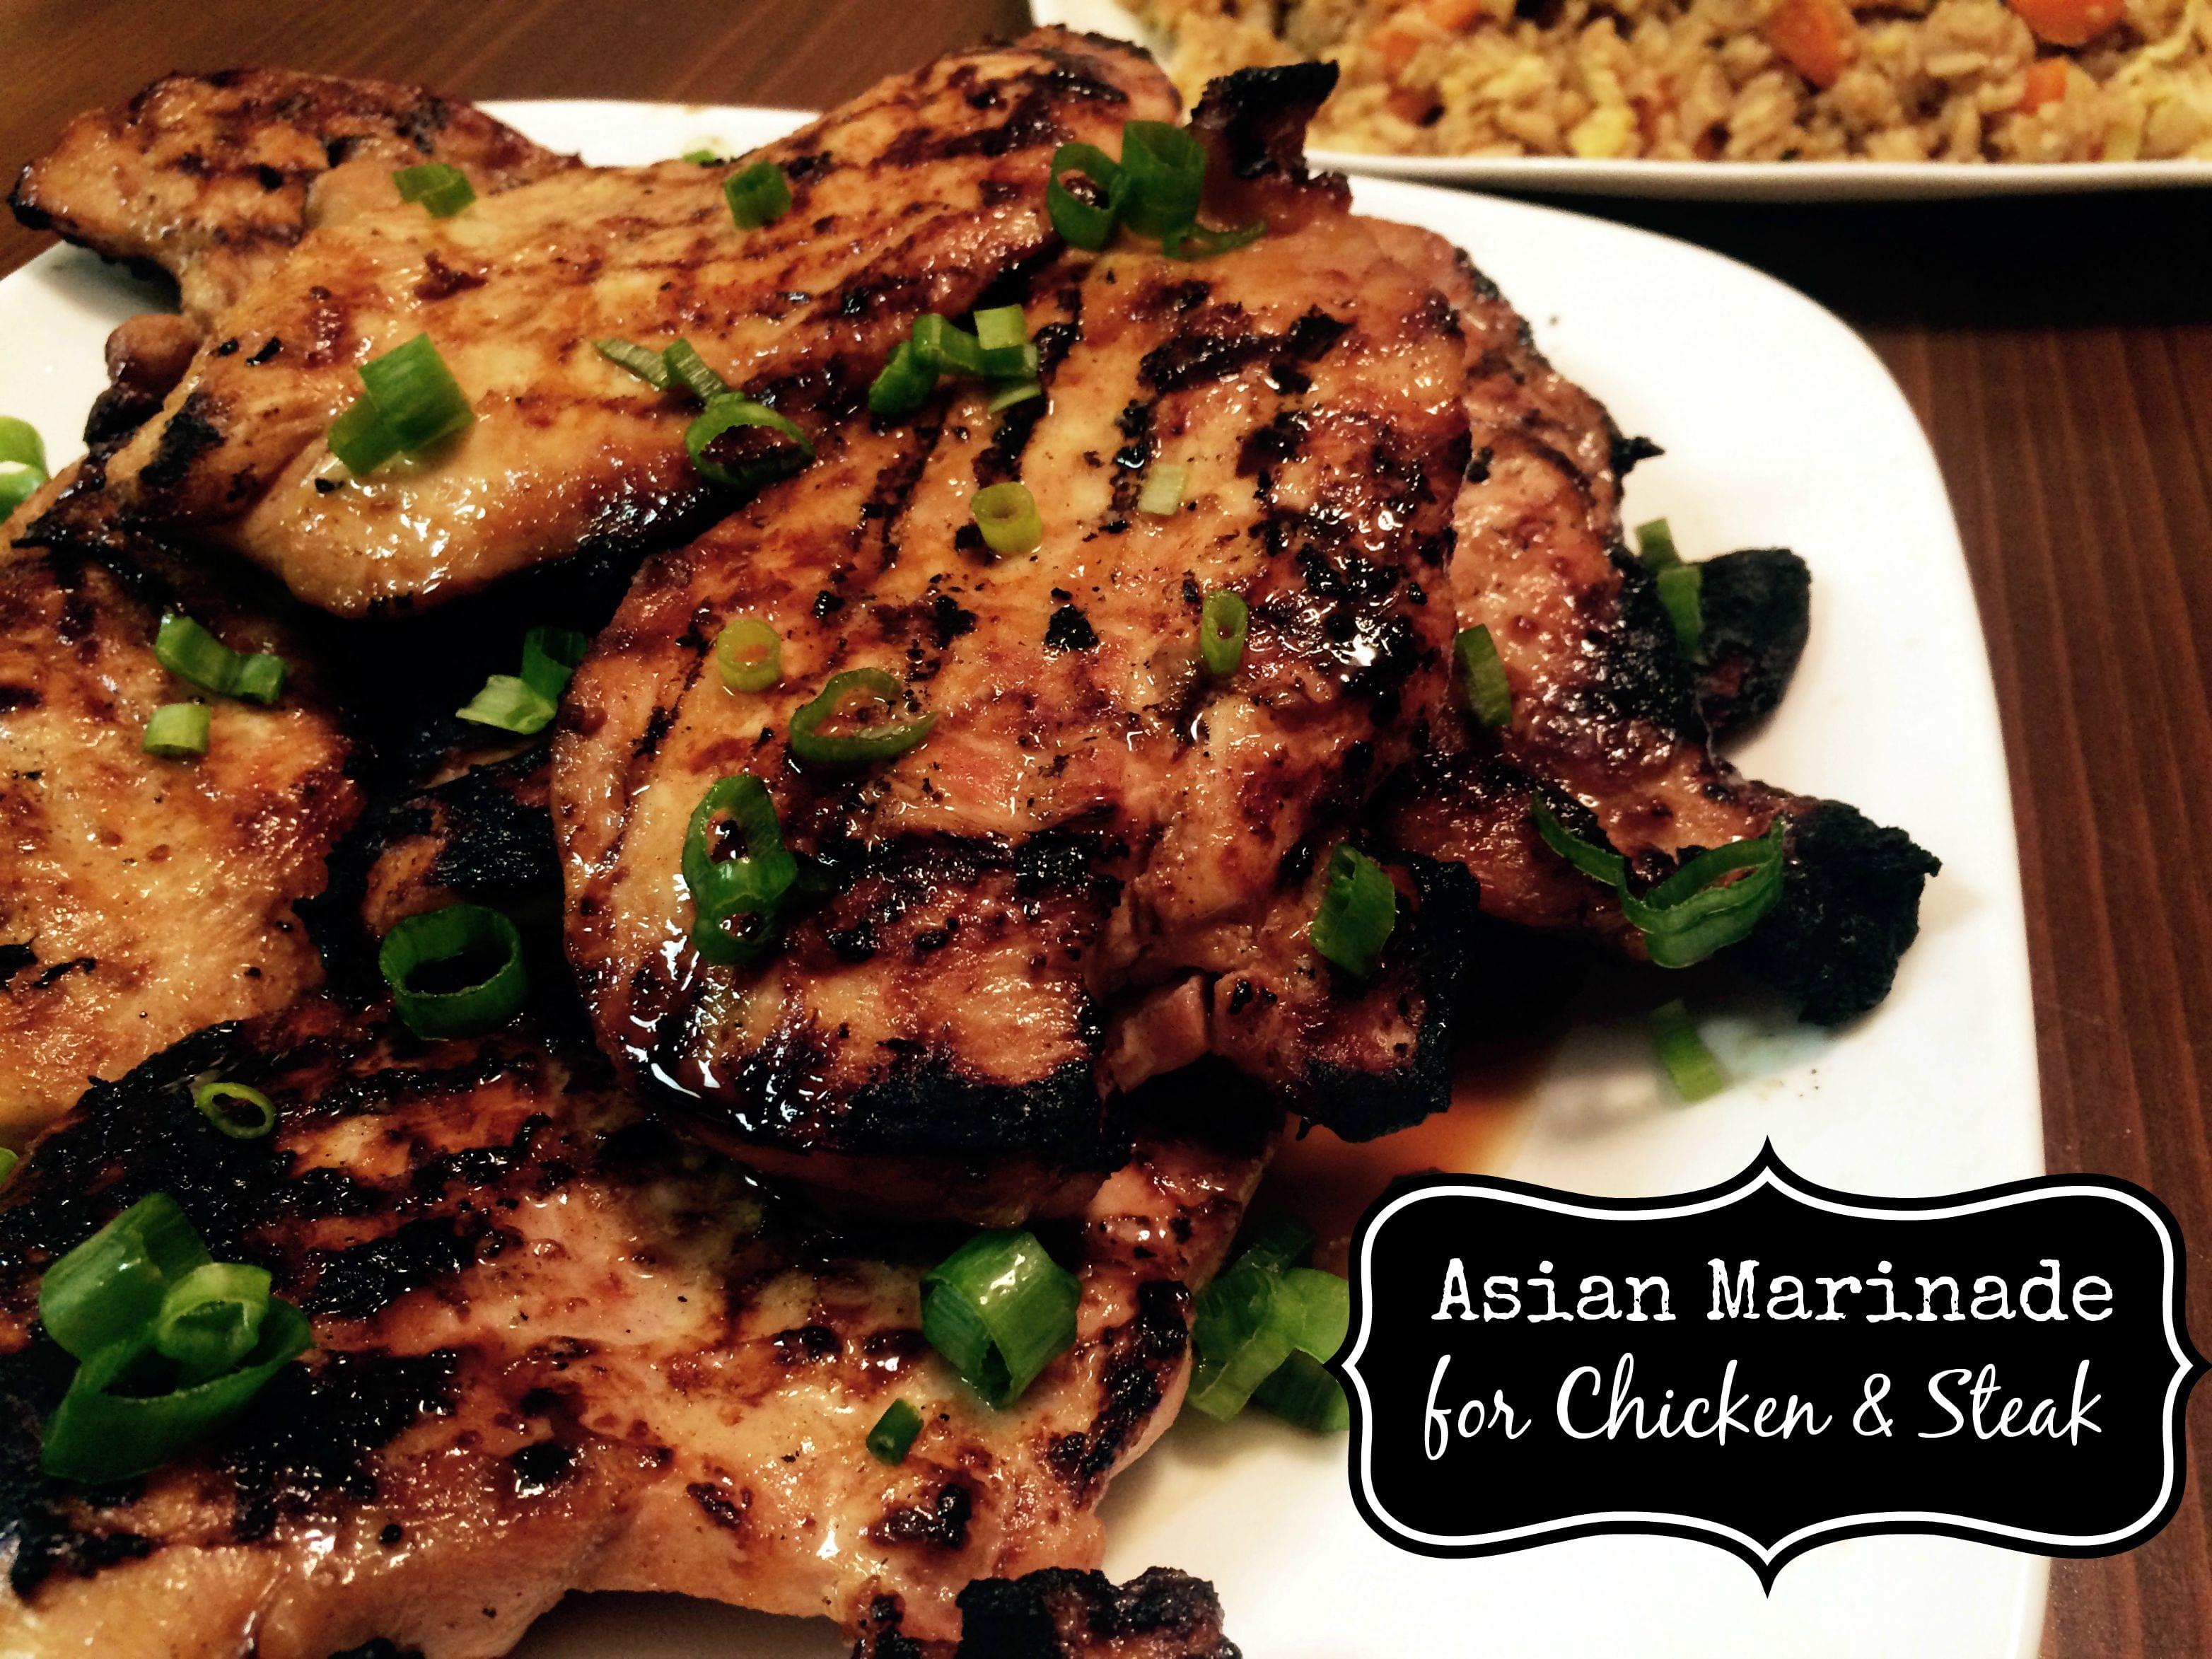 Protein reccomend Asian marinades for meat